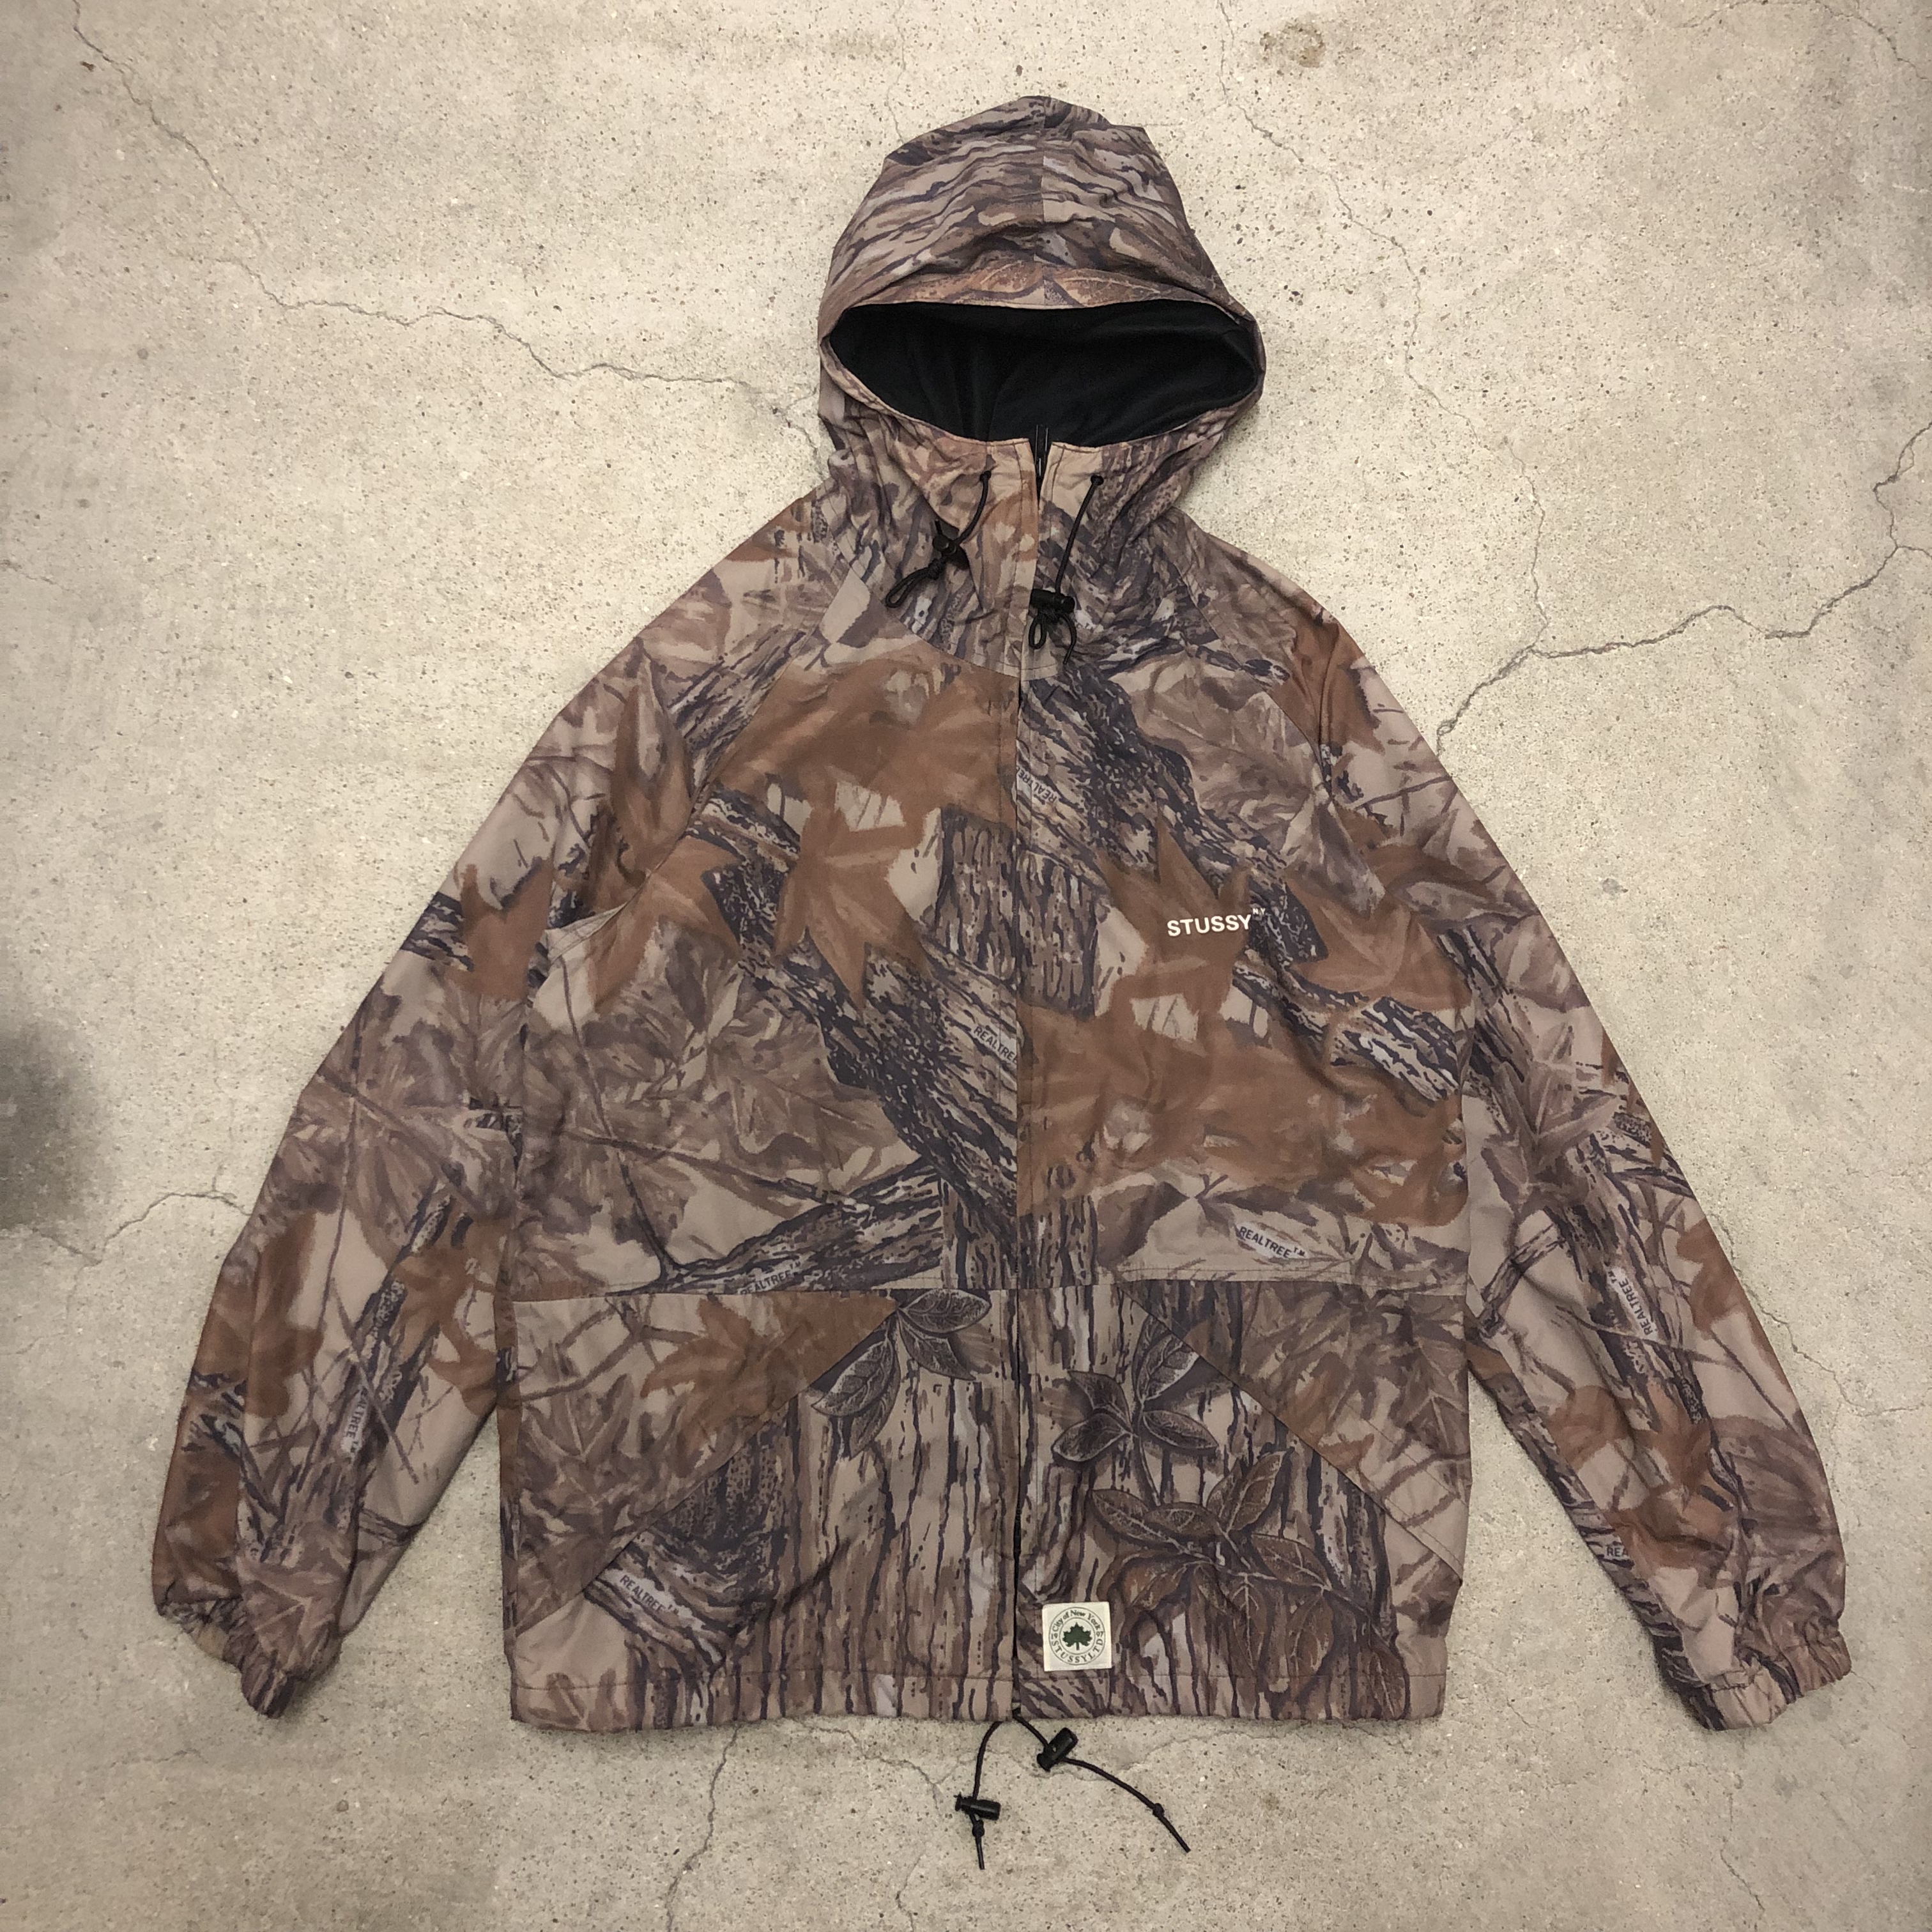 90s OLD STUSSY×Walls/Real Tree camo | Vintage.City